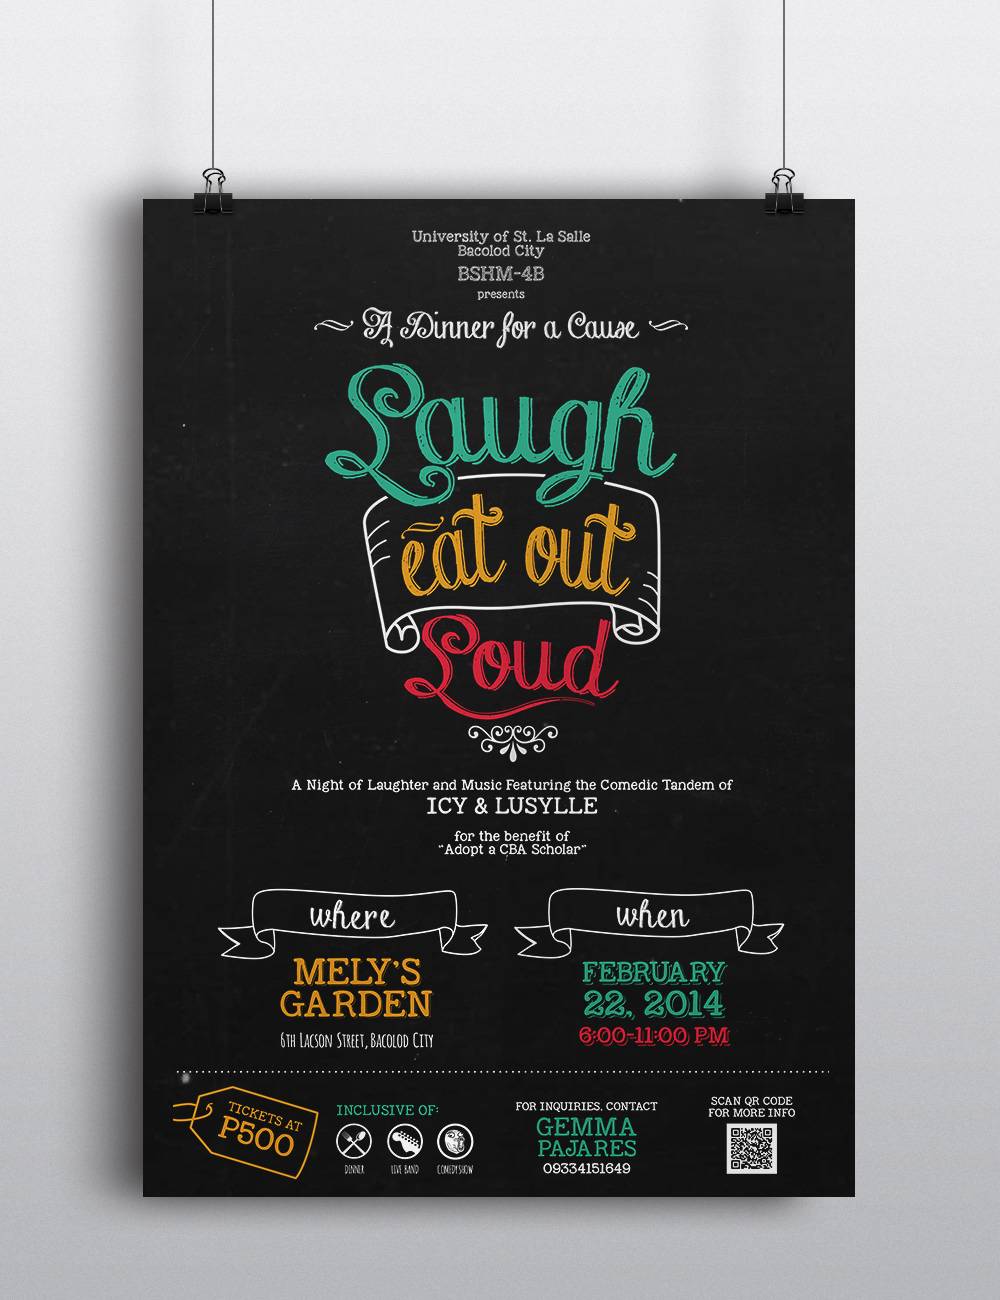 chalk poster ticket Event dinner typo Chalkboard for a cause art design graphics print ads